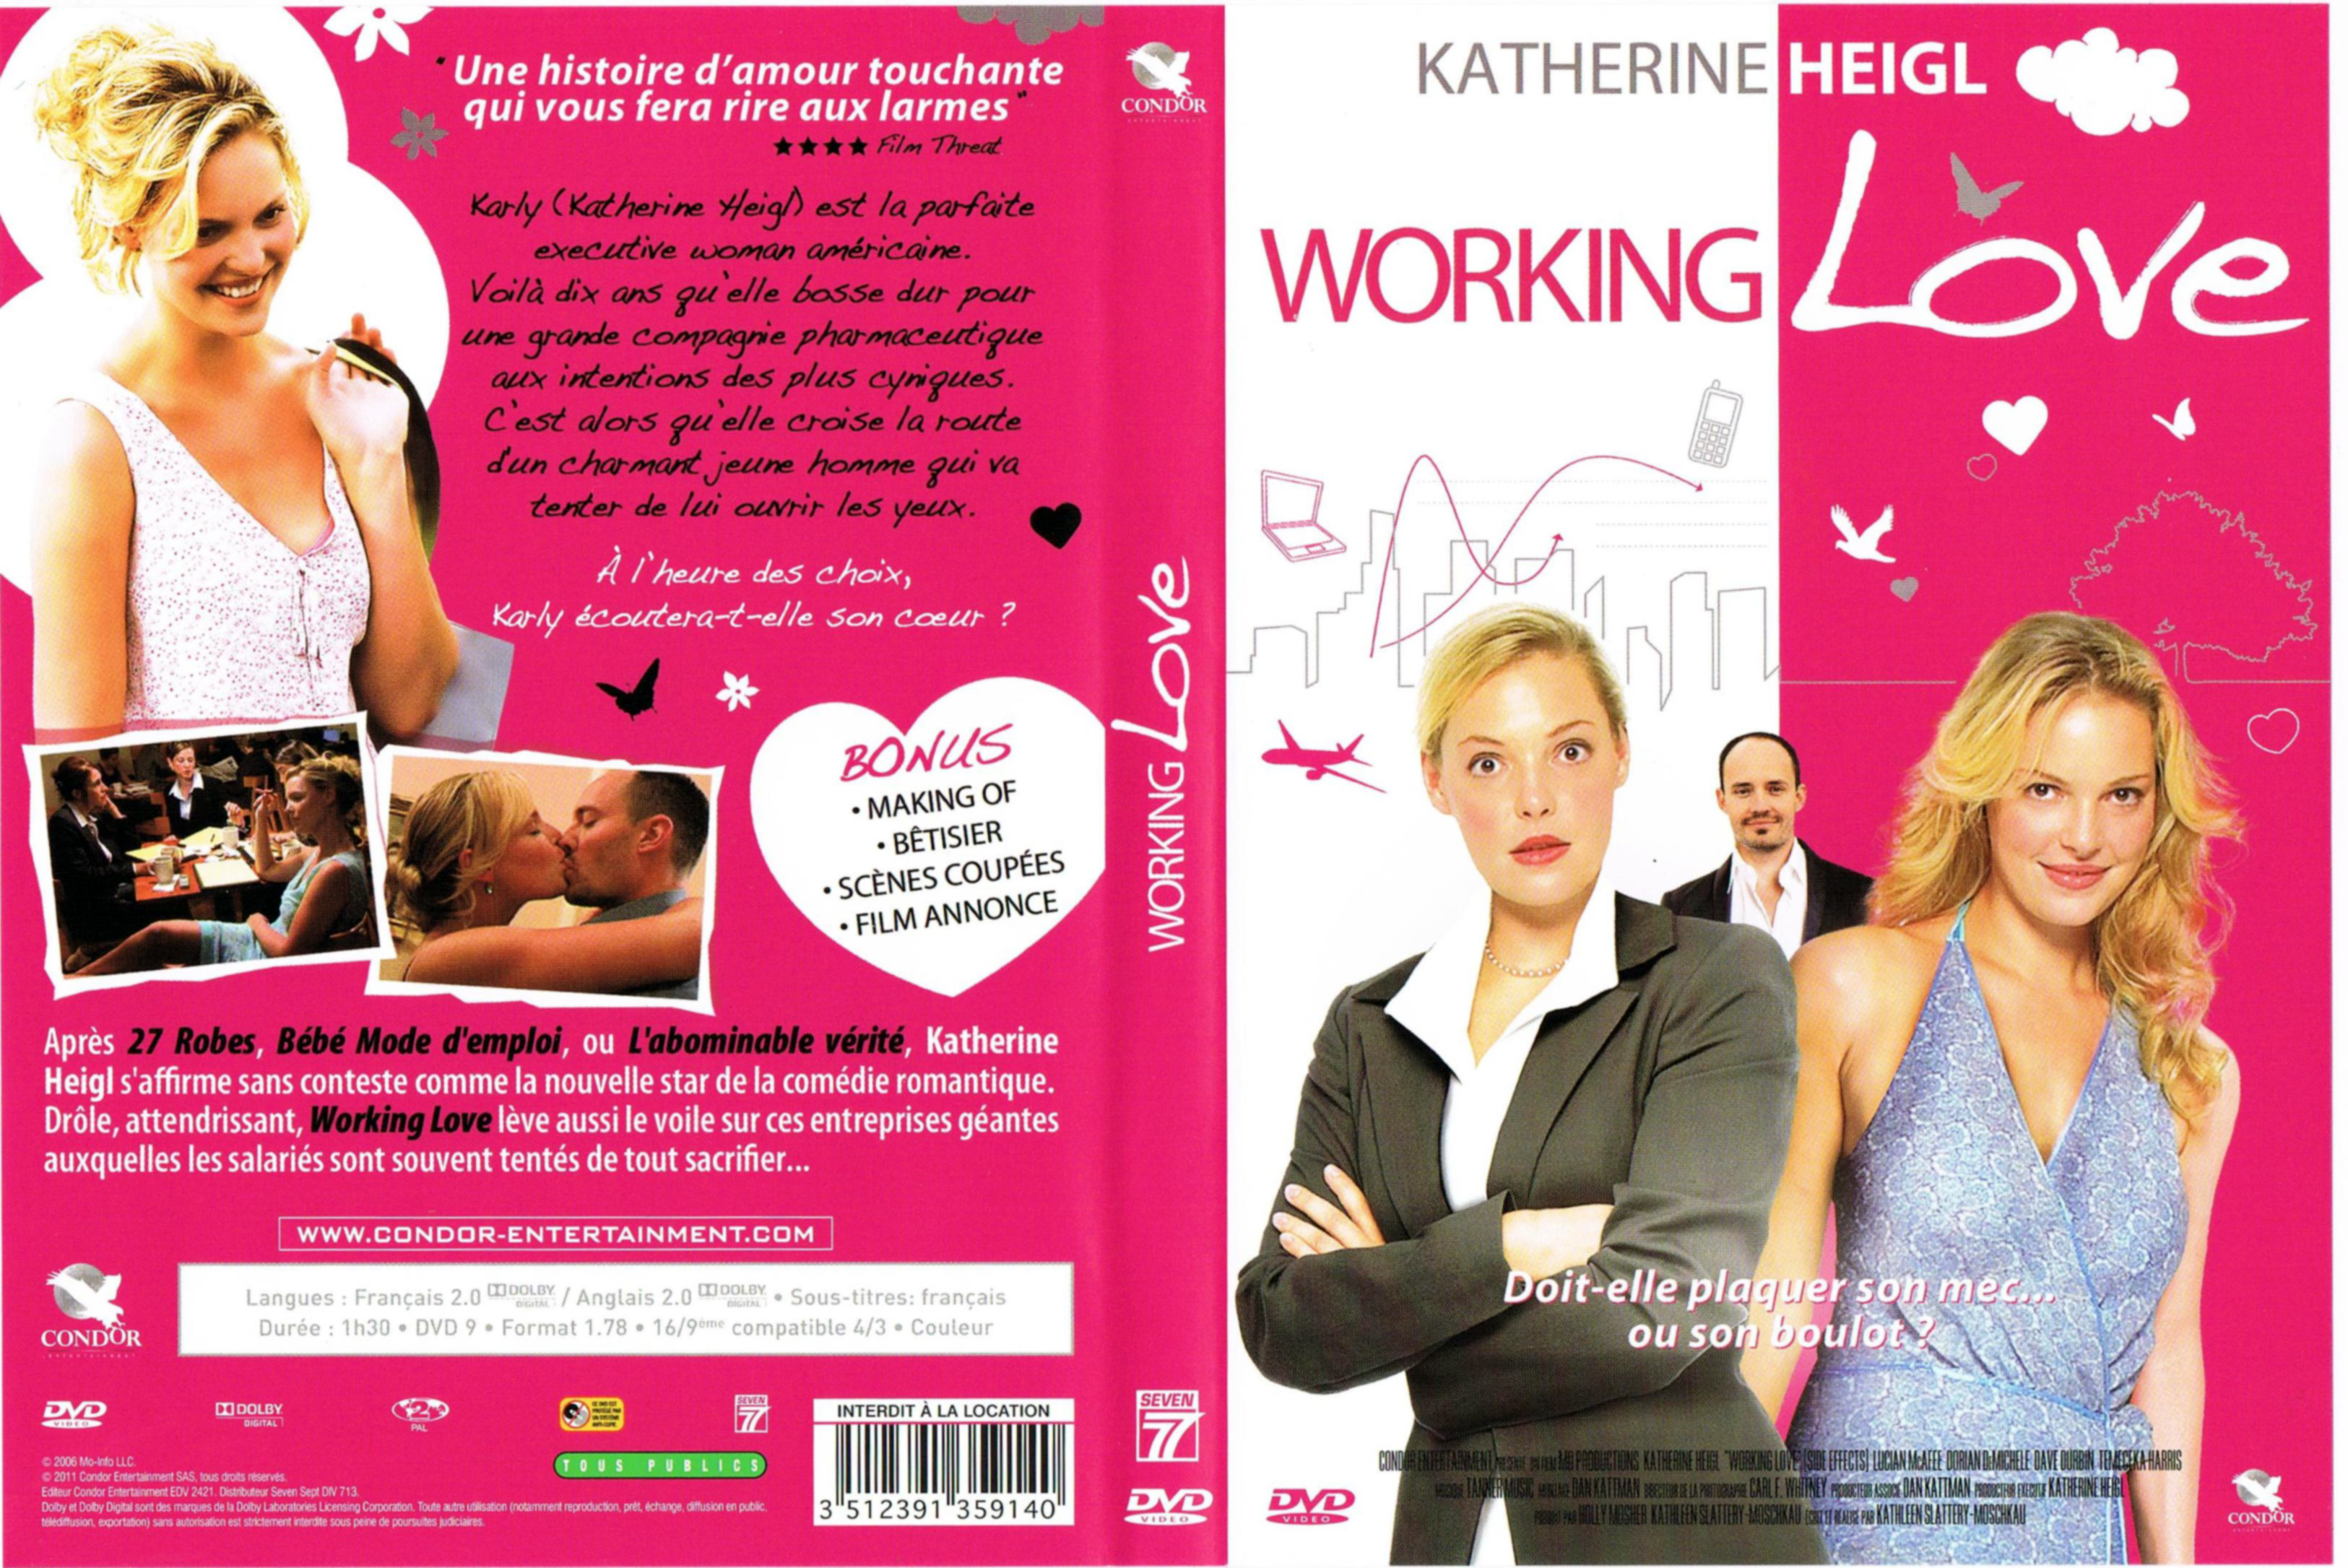 Jaquette DVD Working love